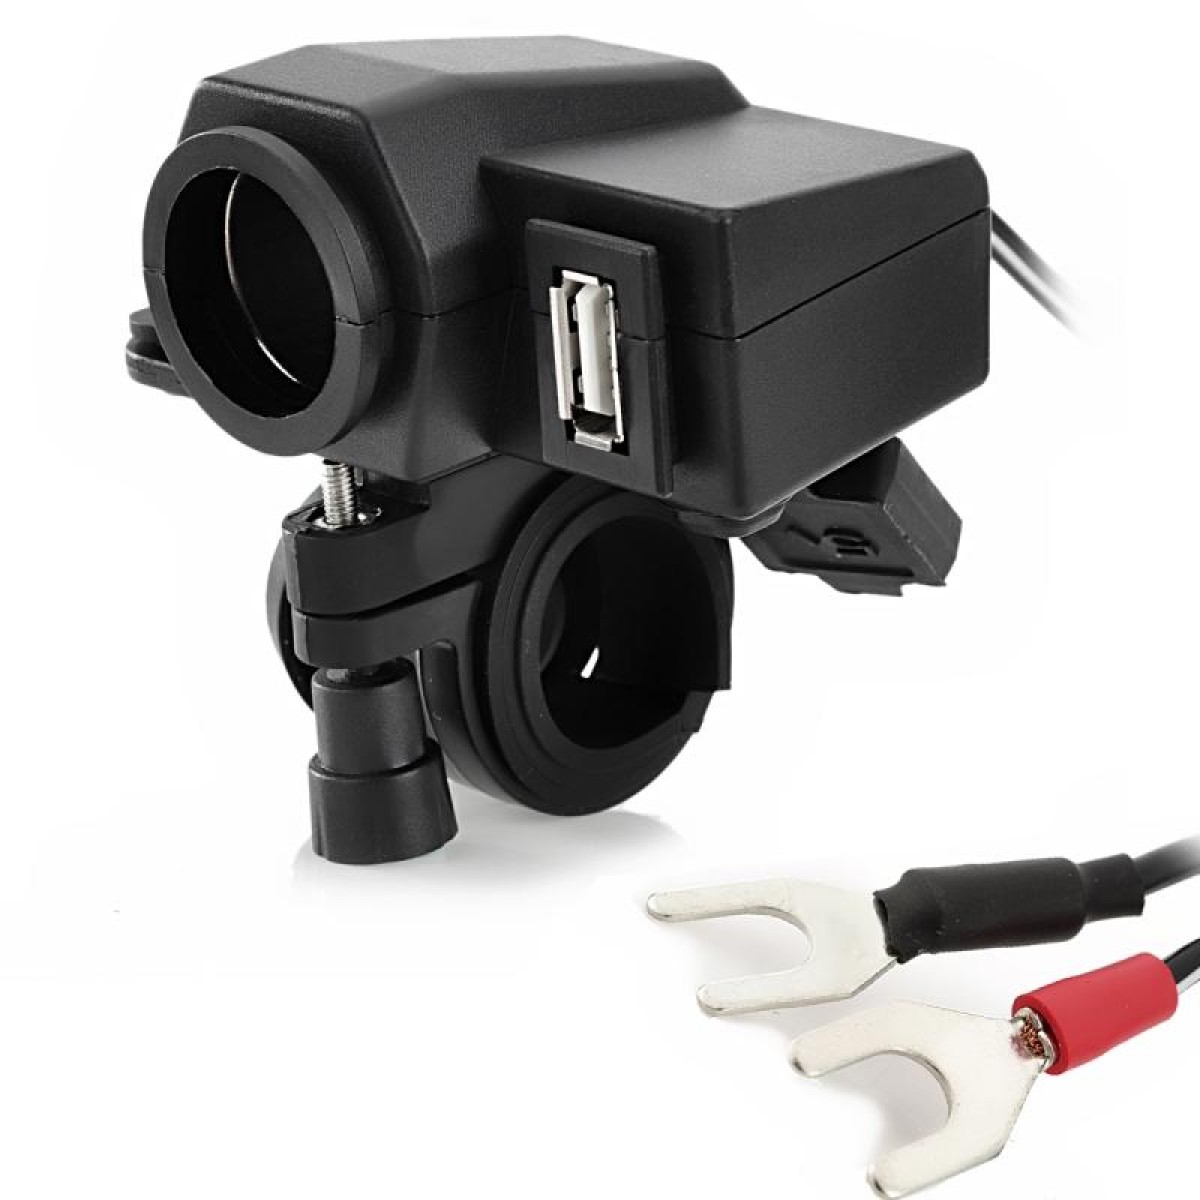 Waterproof USB Charging Dock Station Set for Cellphone / GPS / Motorcycle / Other Devices(Black)